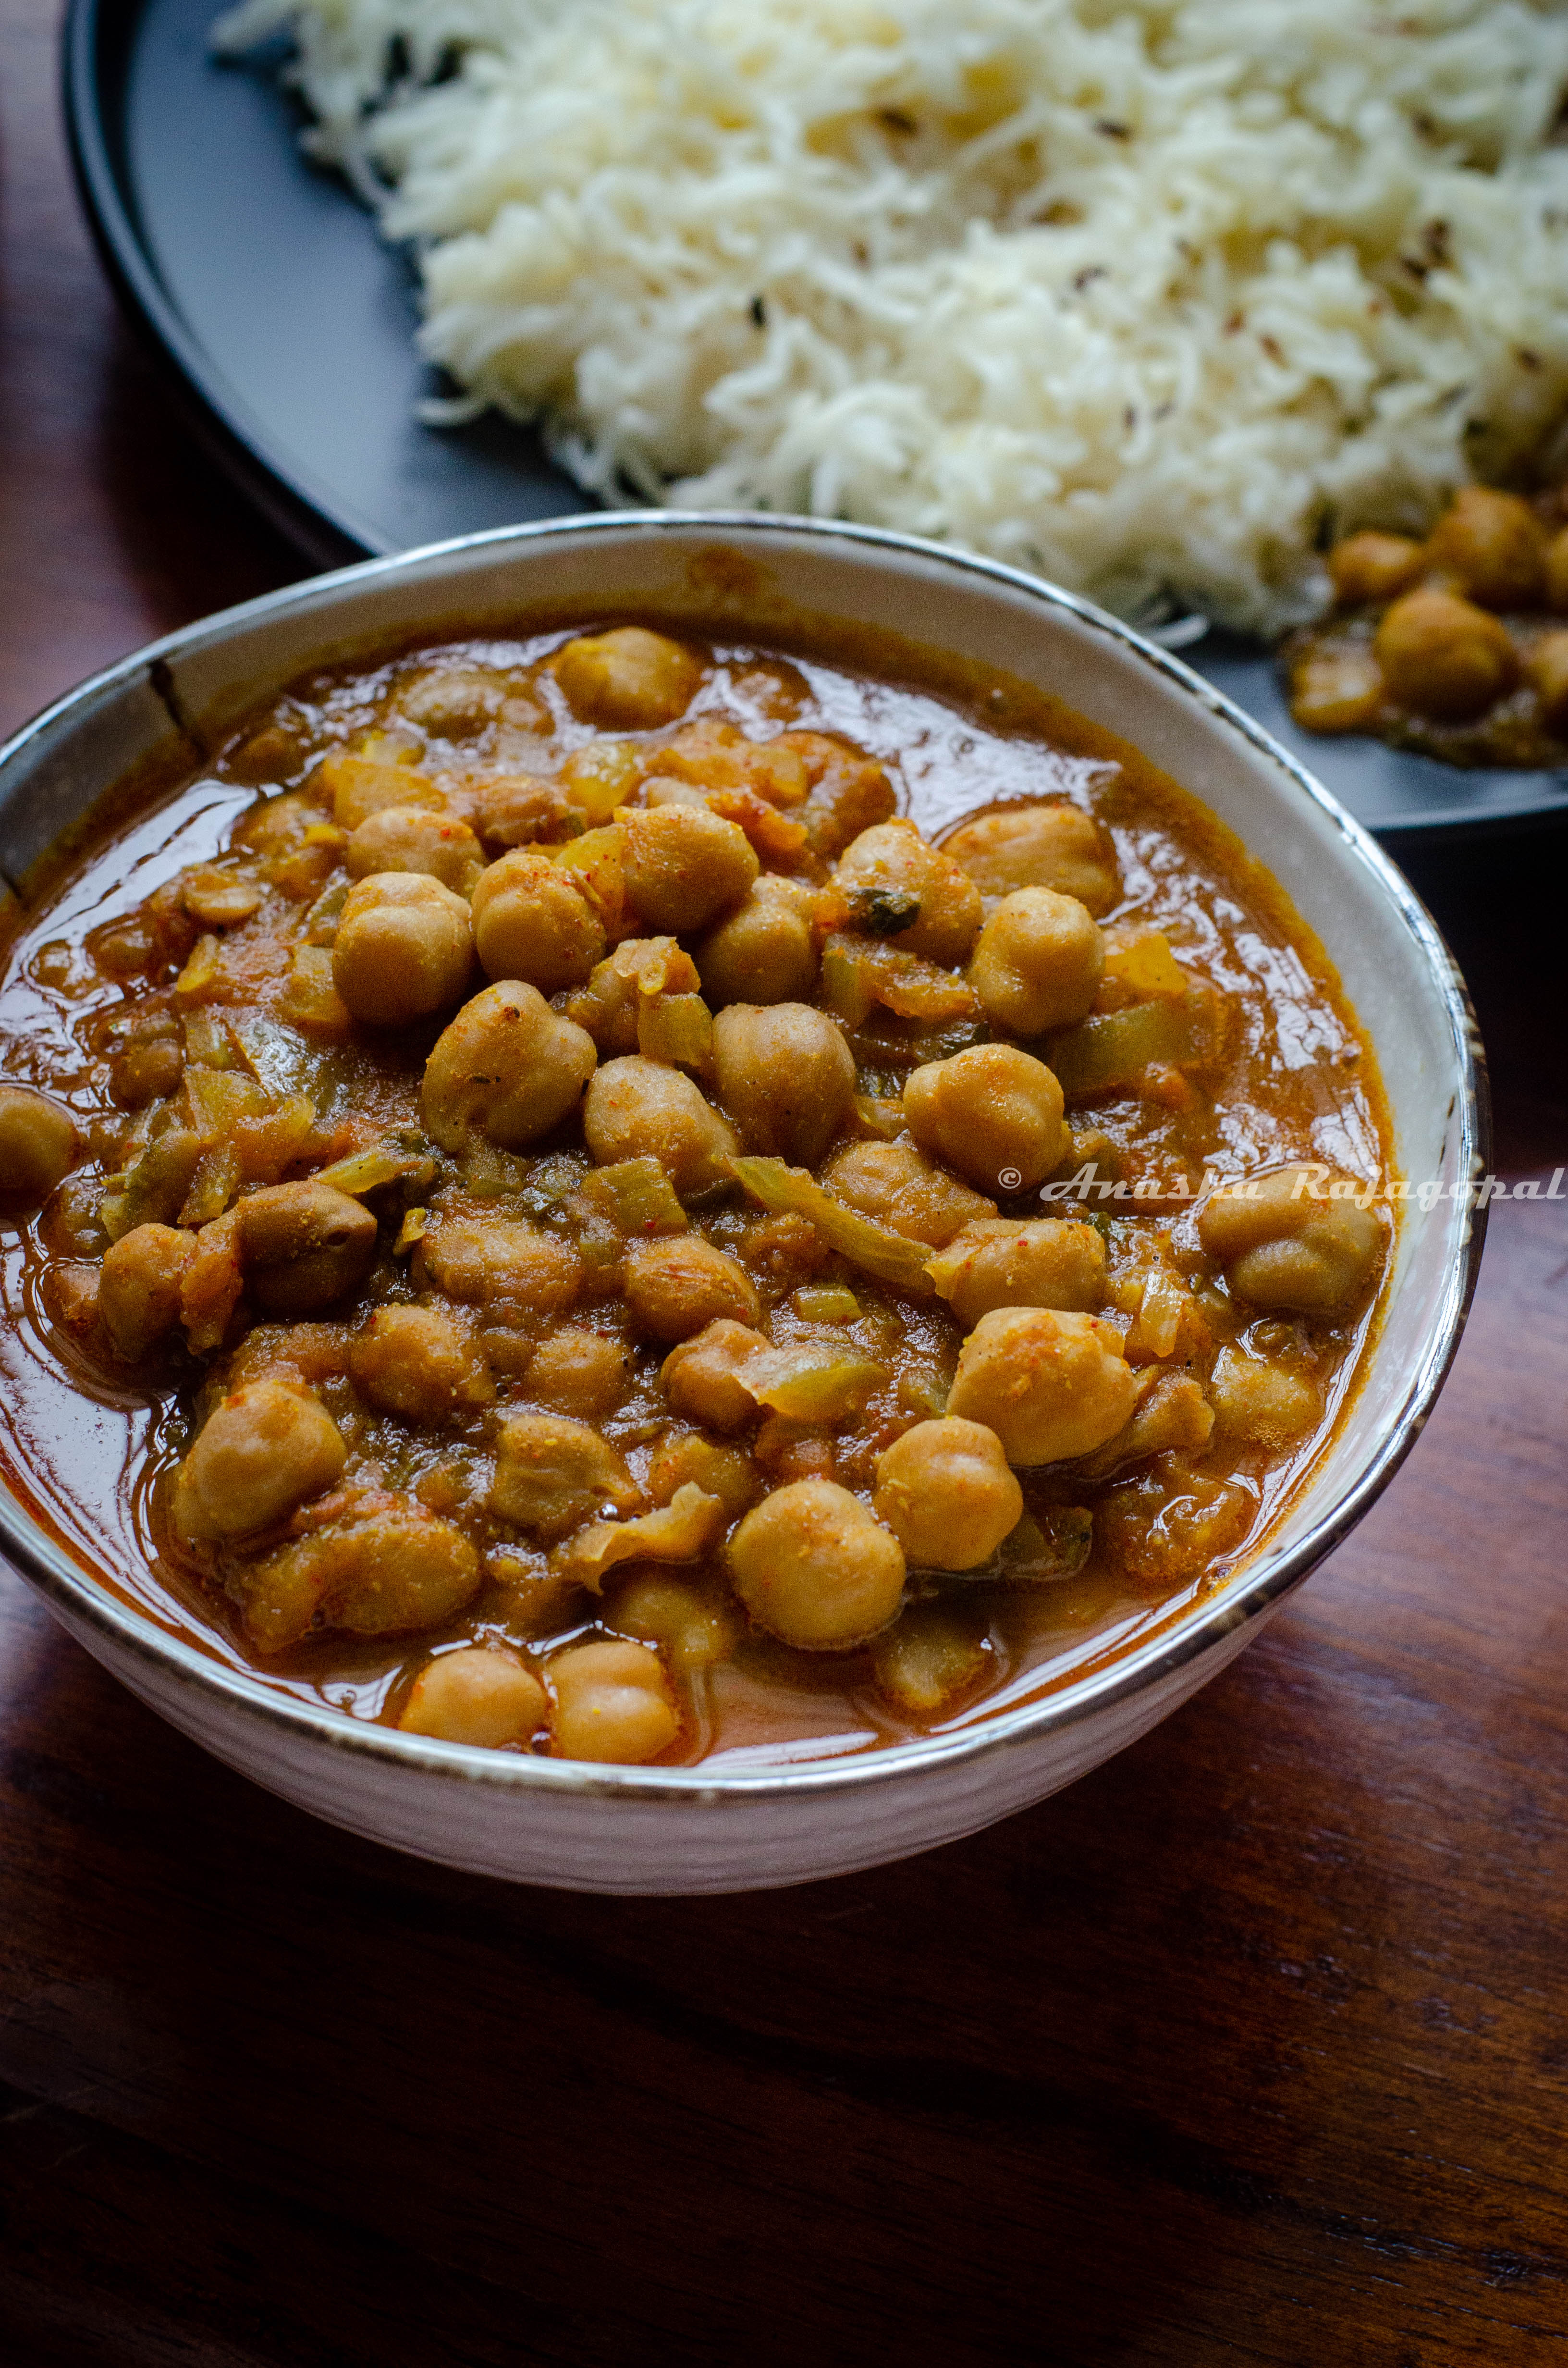 Punjabi chole masala served in a white bowl with steamed rice